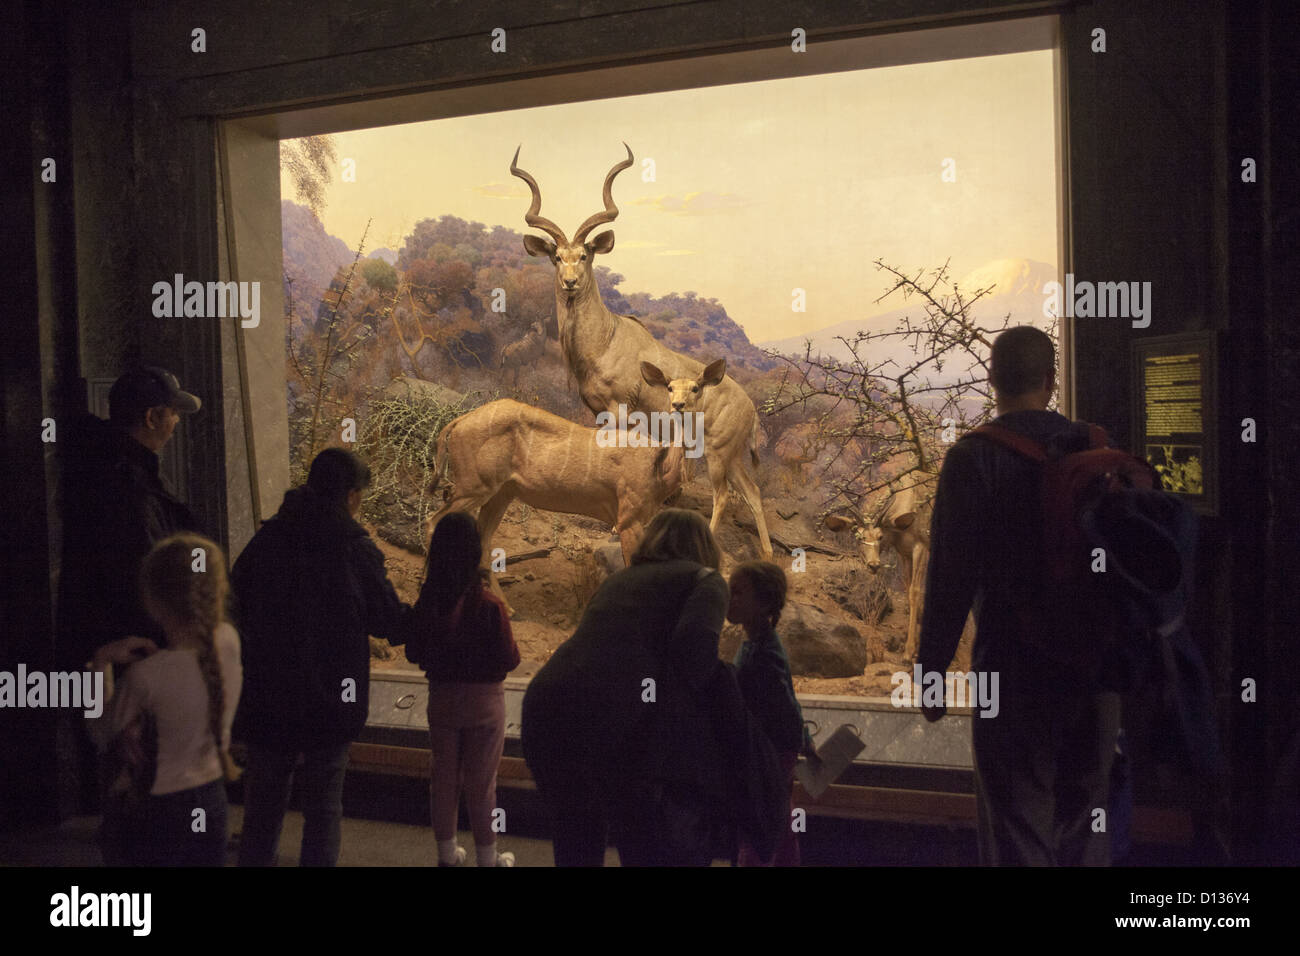 Gallery of North American Mammals at the American Museum of Natural History in New York City. Stock Photo